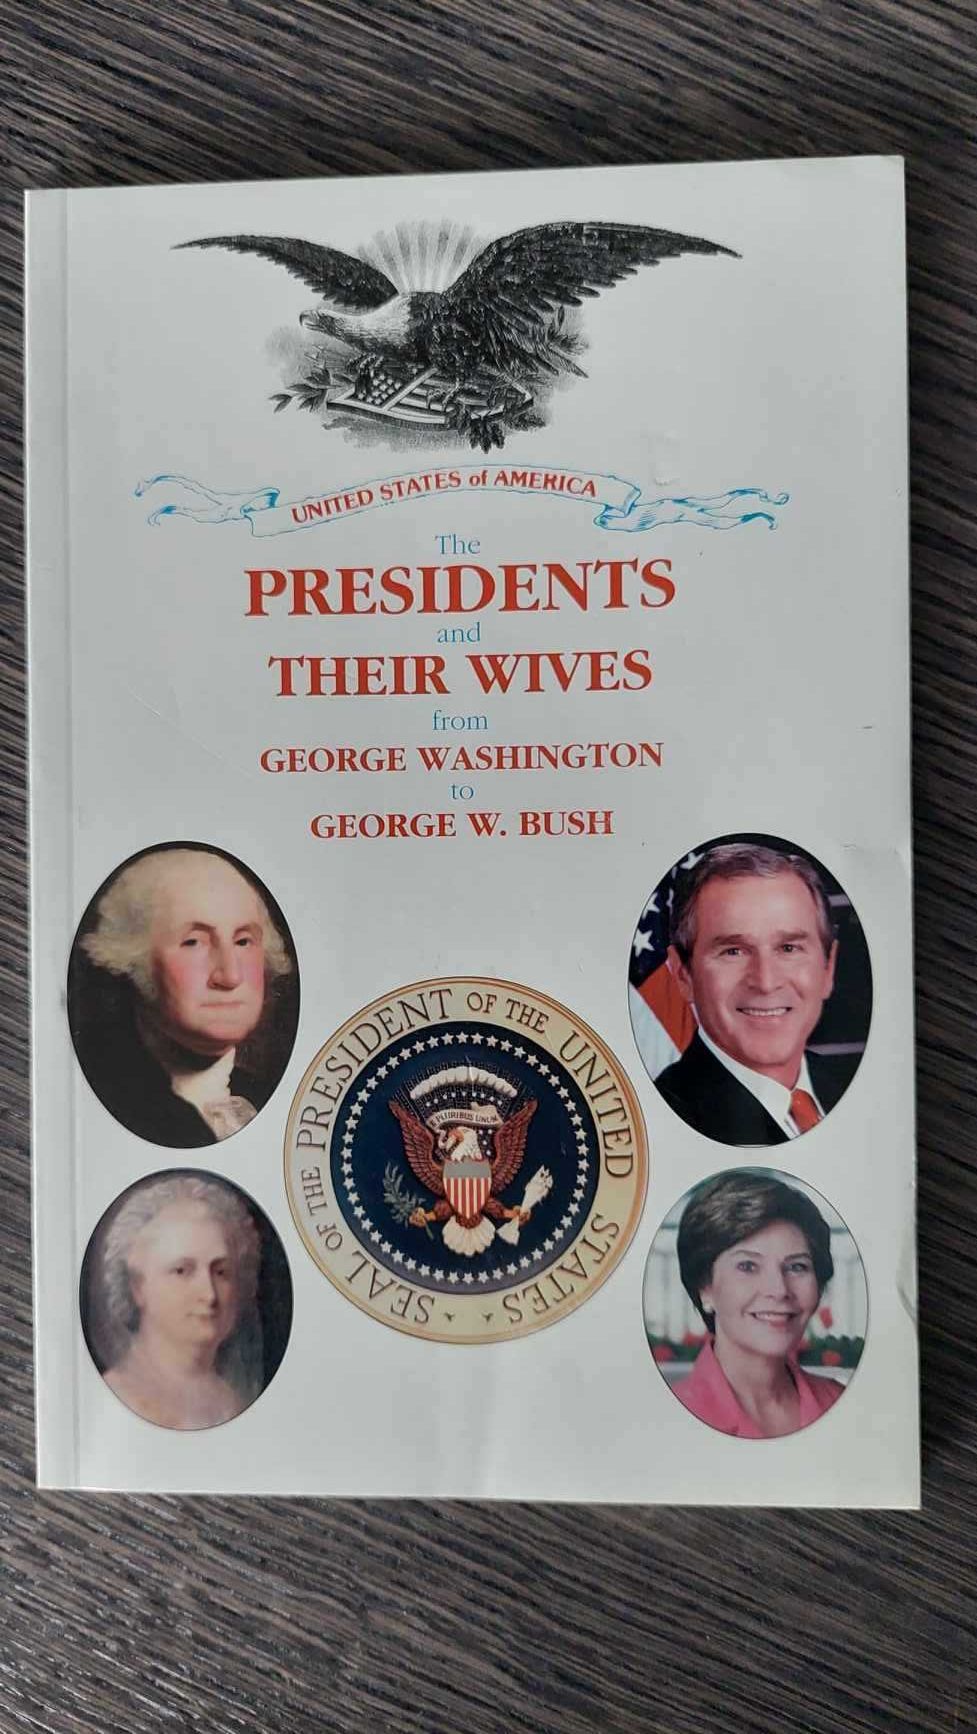 Książka "The Presidents and their wives from G.Washington to G.W.Bush"